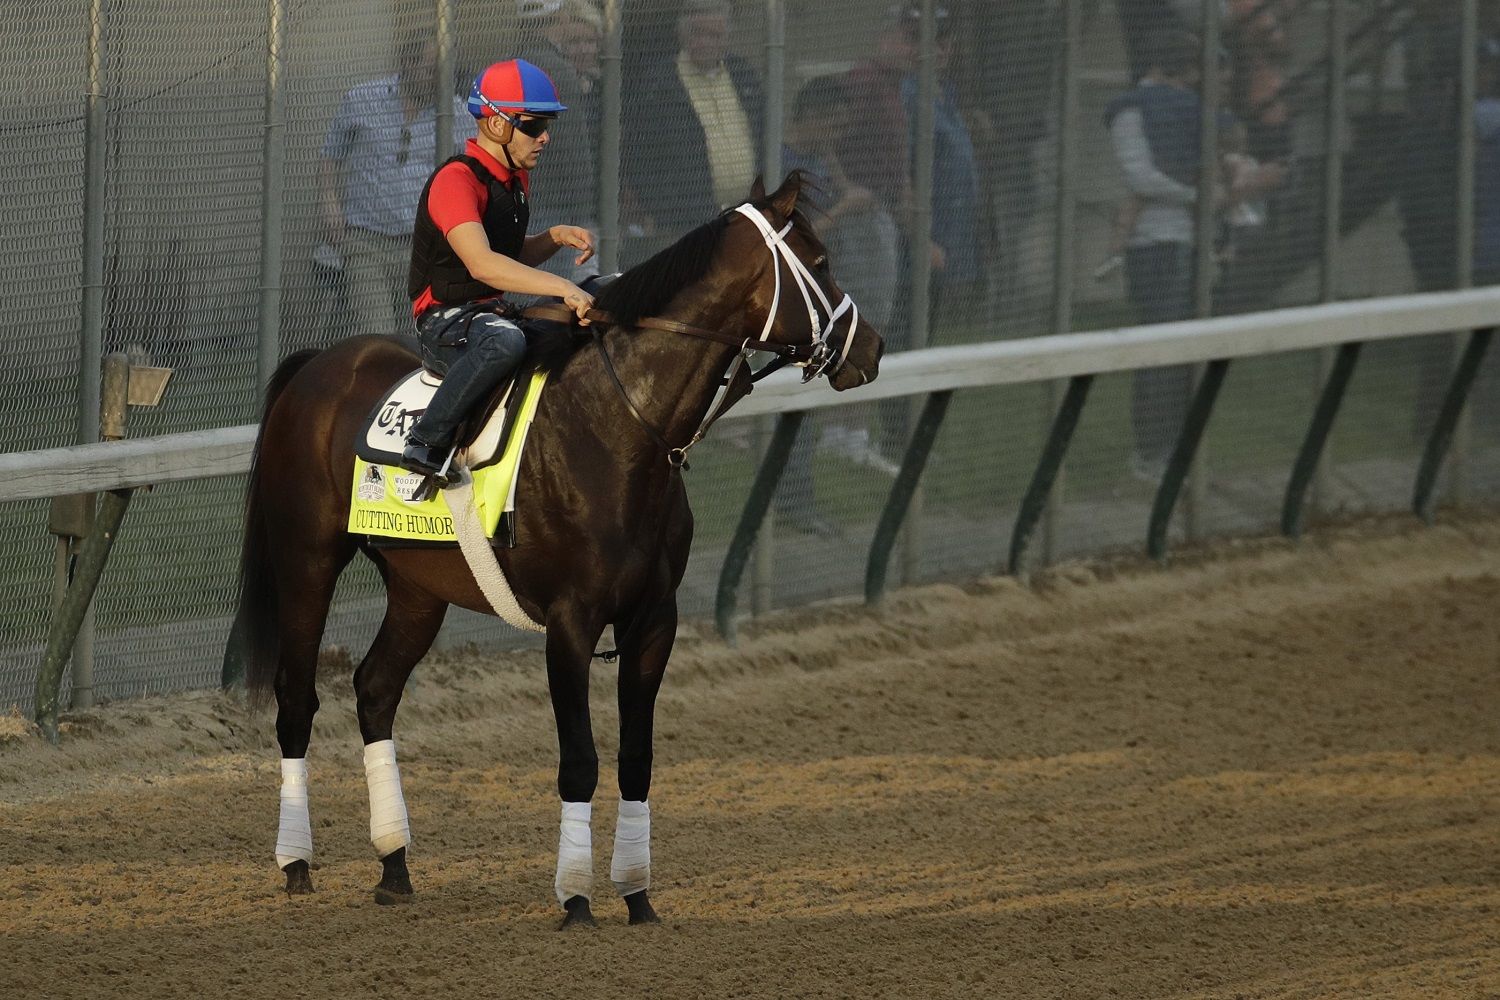 Kentucky Derby entrant Cutting Humor waits on the track during a workout at Churchill Downs Wednesday, May 1, 2019, in Louisville, Ky. The 145th running of the Kentucky Derby is scheduled for Saturday, May 4. (AP Photo/Charlie Riedel)